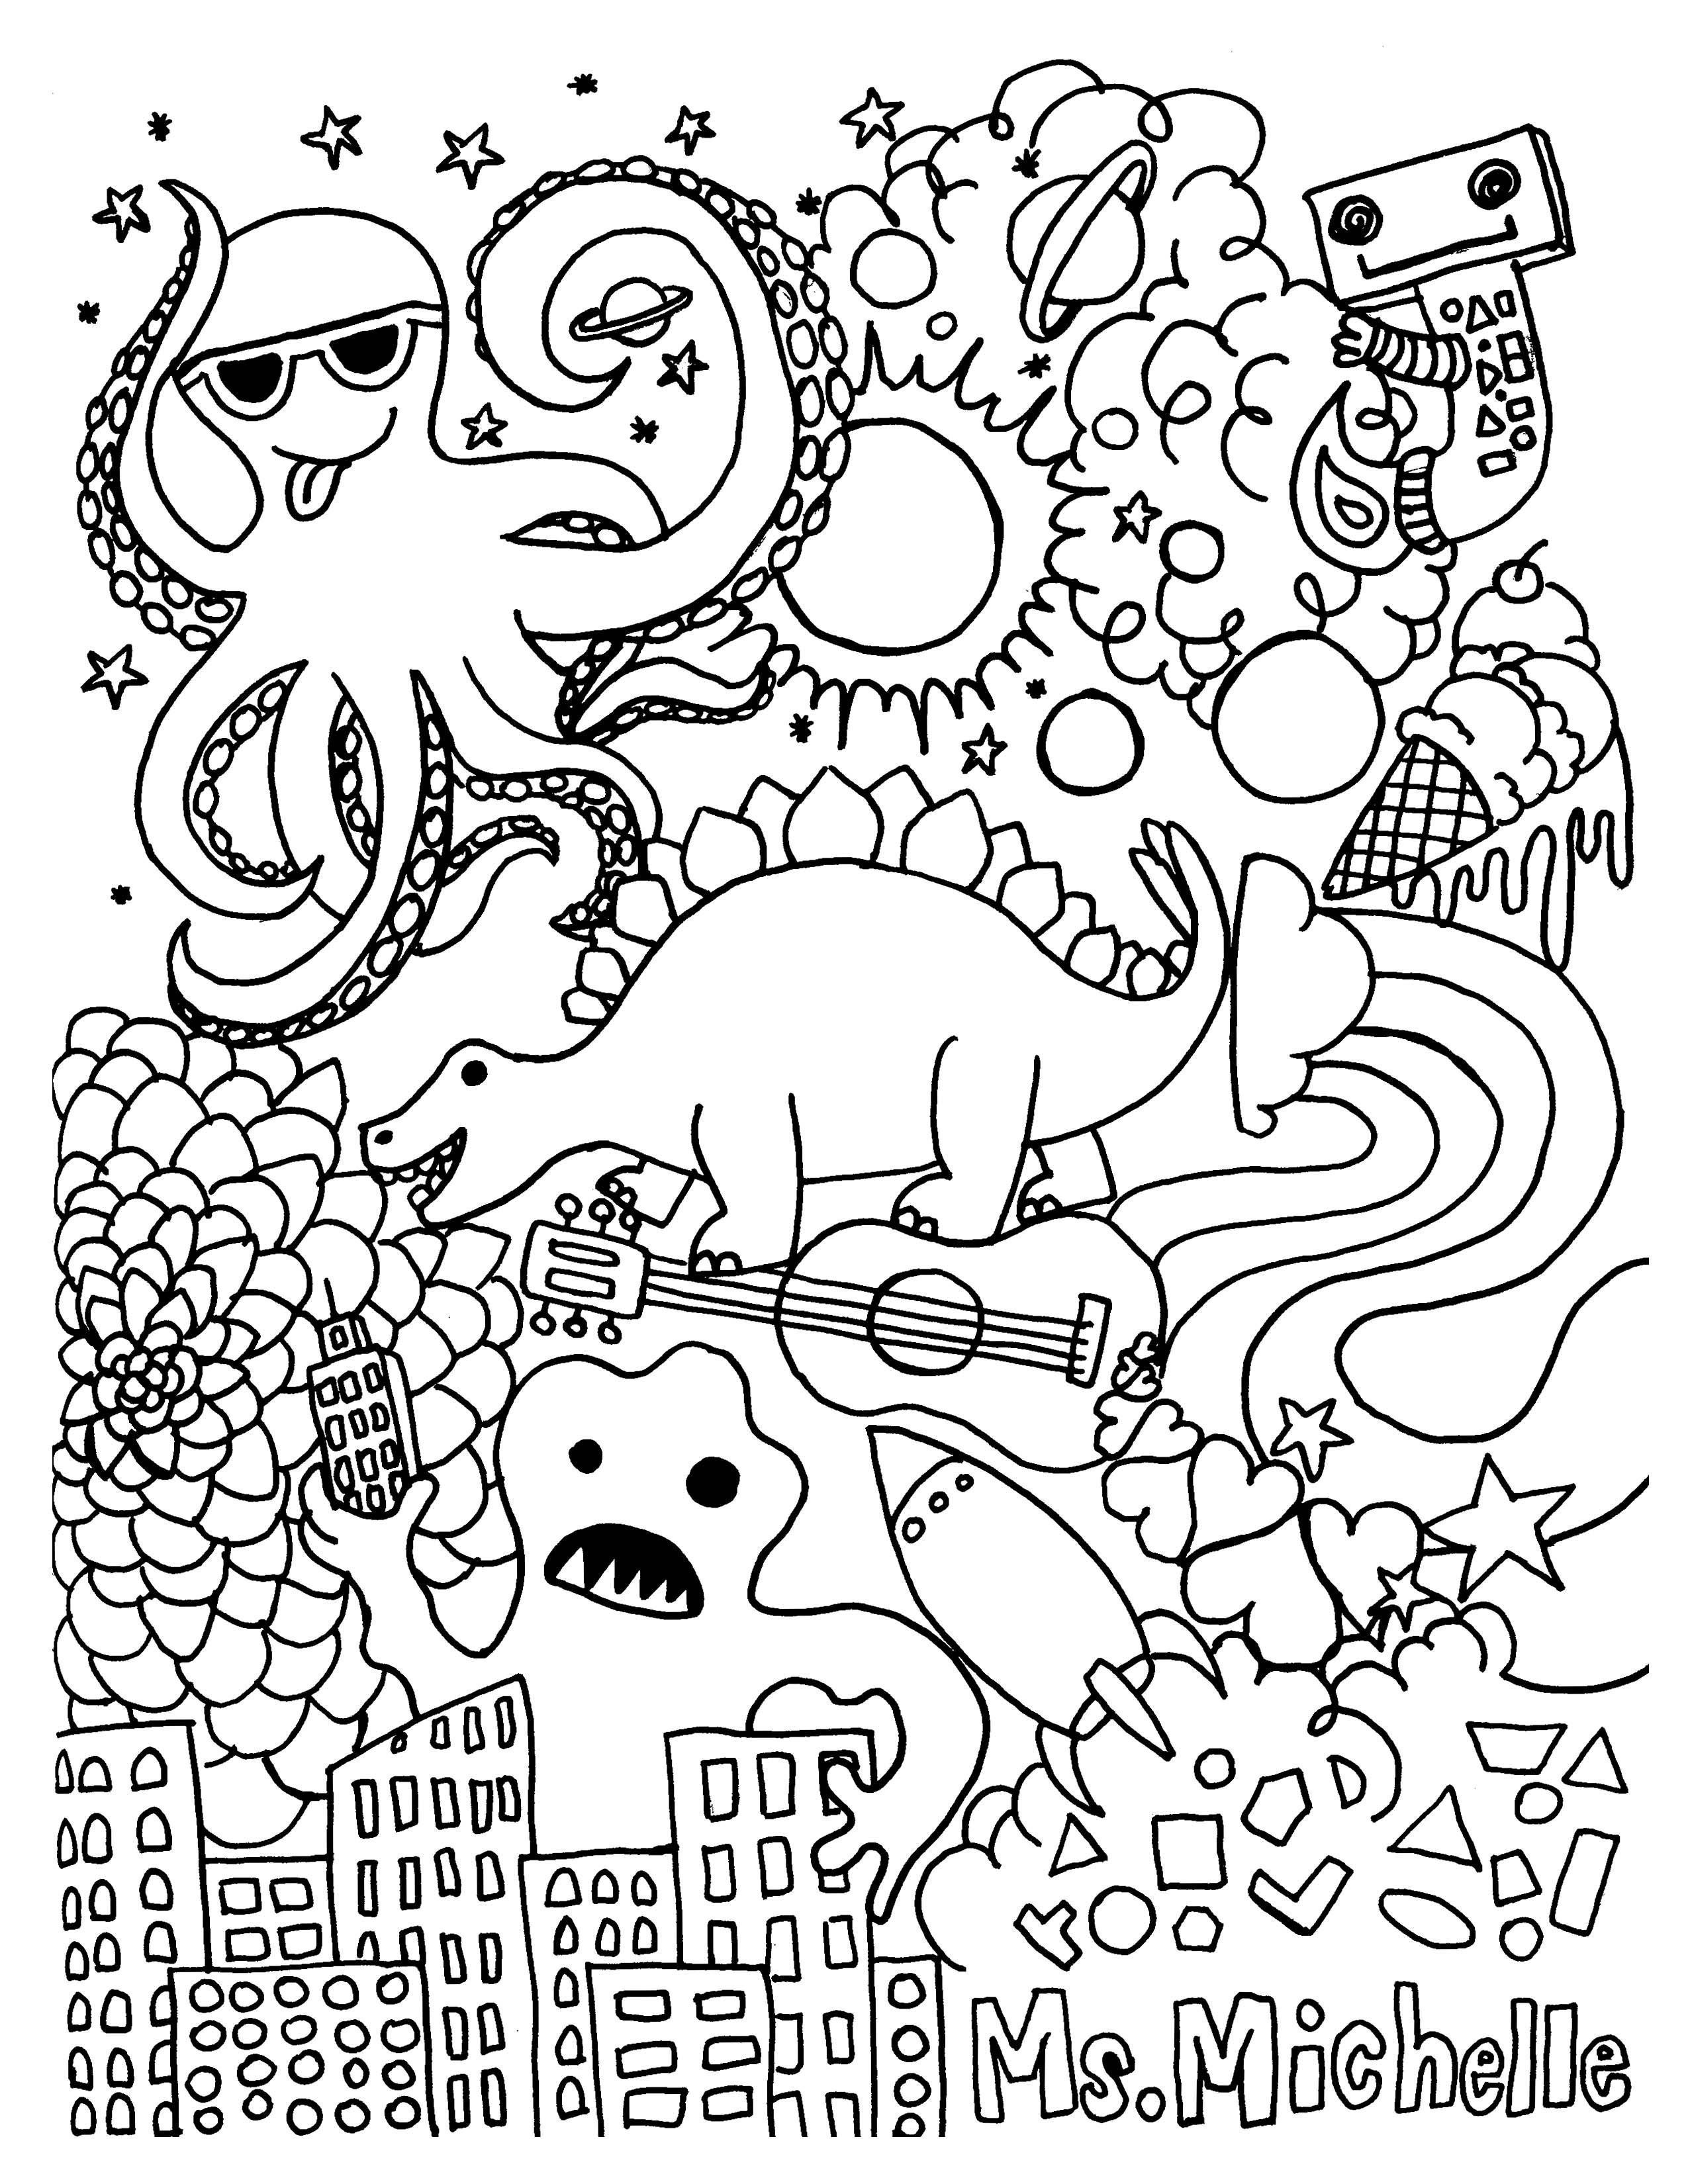 Coloring Pages For Elementary Students Luxury Halloween Coloring Pages For Elementary Jvzooreview